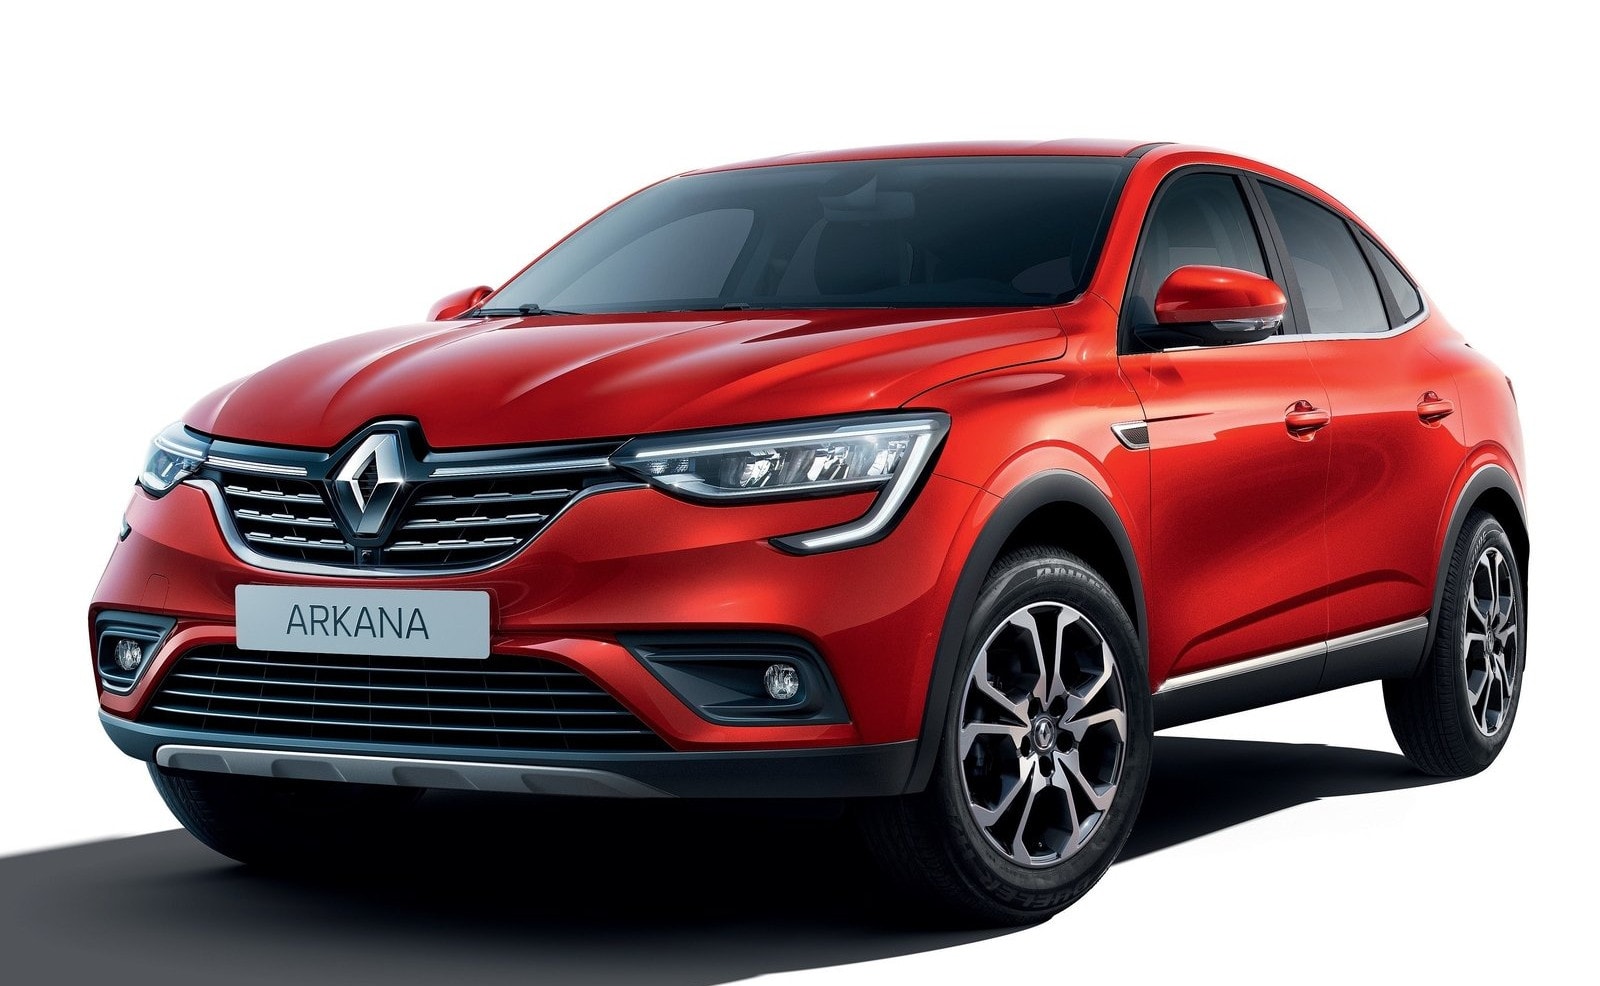 Renault Arkana: the SUV coupe officially unveiled